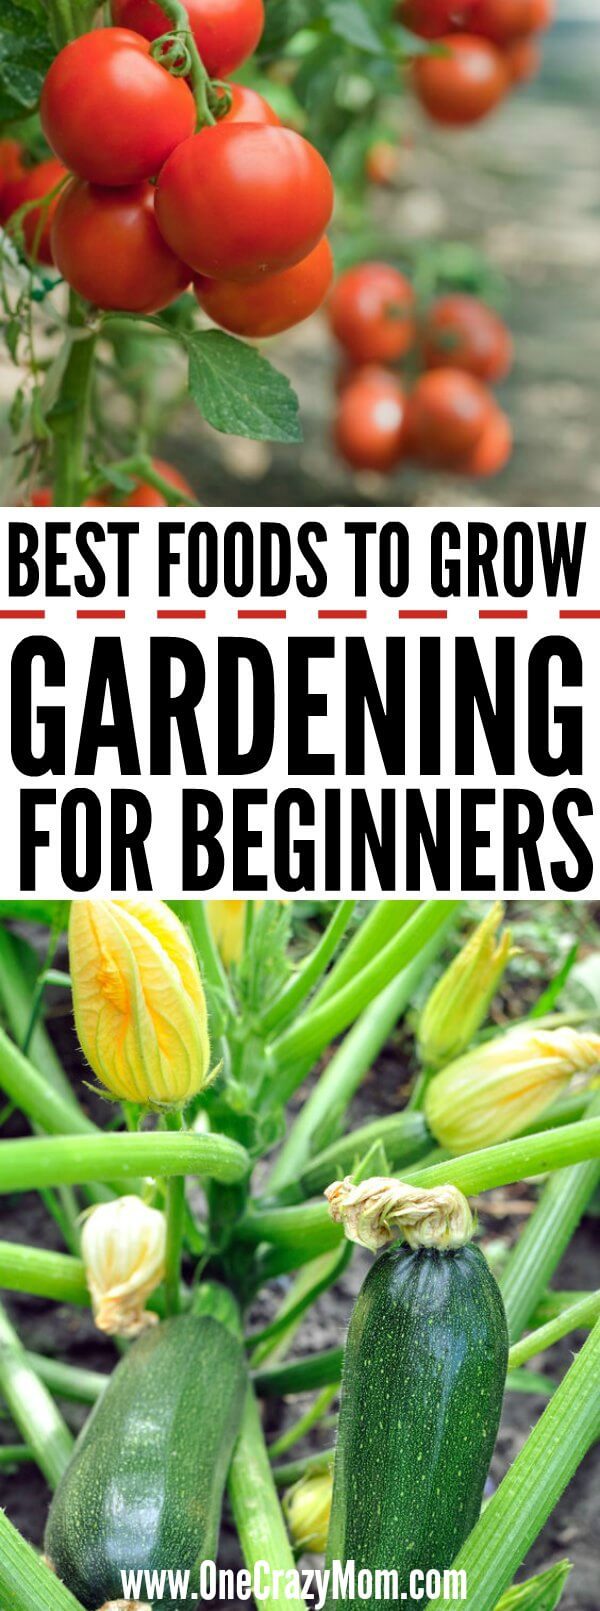 Home Gardening for Beginners. What to grow in a garden for beginners. Gardening for Beginners. Learn all about vegetable gardening for beginners. These are easy foods to grow in the vegetable garden.